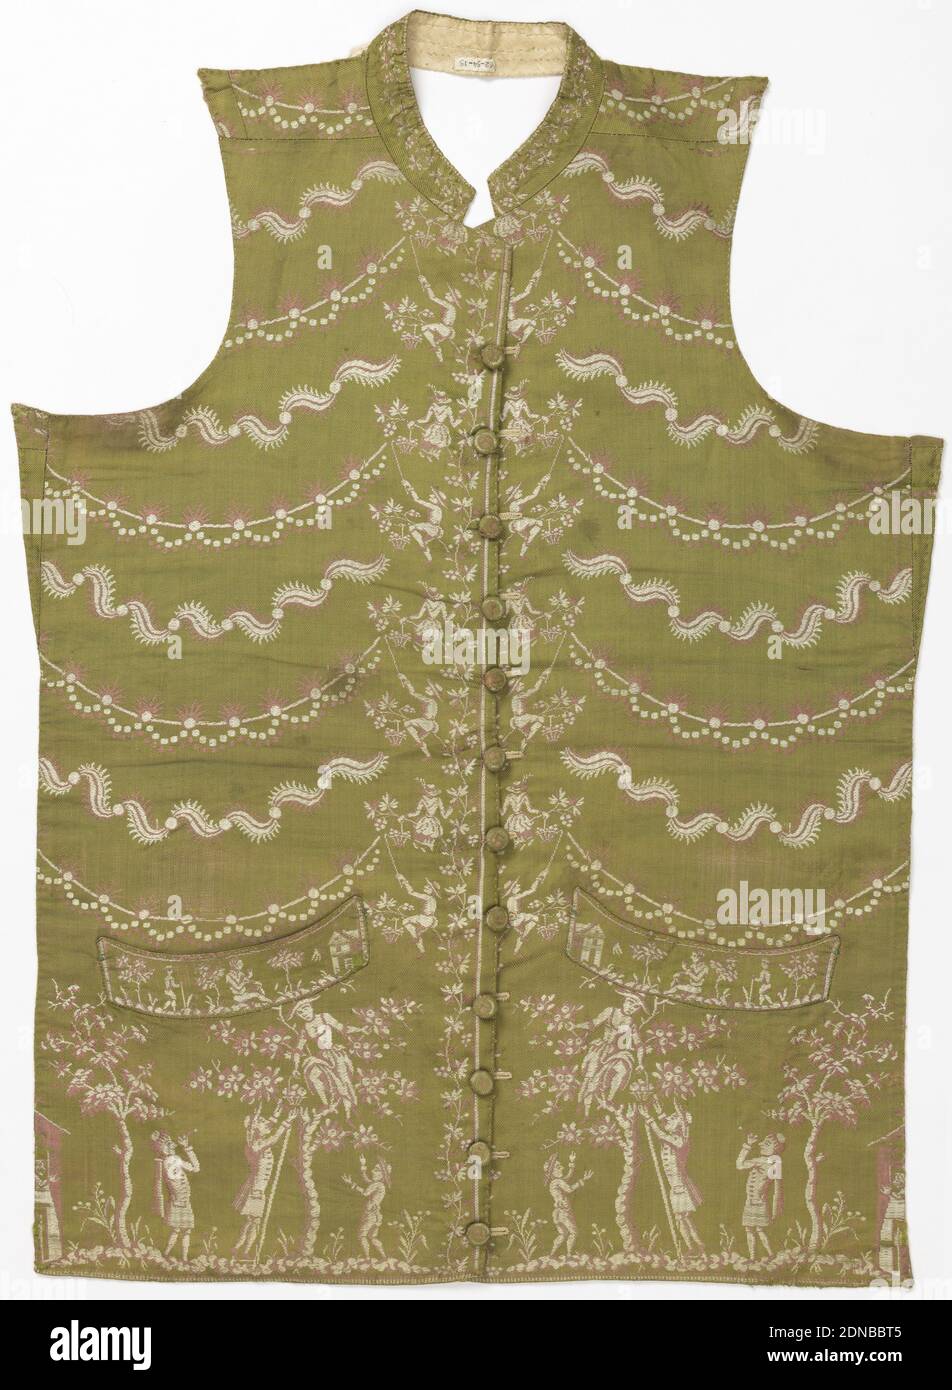 Waistcoat, Medium: silk Technique: twill weave, Green silk fabric woven for a waistcoat has a scene with a woman in a fruit tree, lowering her basket down a man below. Space above the pocket flaps has rows of garland. Vertical repeat of a women lowering a fruit basket to a man with a long hook fills spaces next to the buttons and button holes., France, late 18th century, costume & accessories, Waistcoat Stock Photo